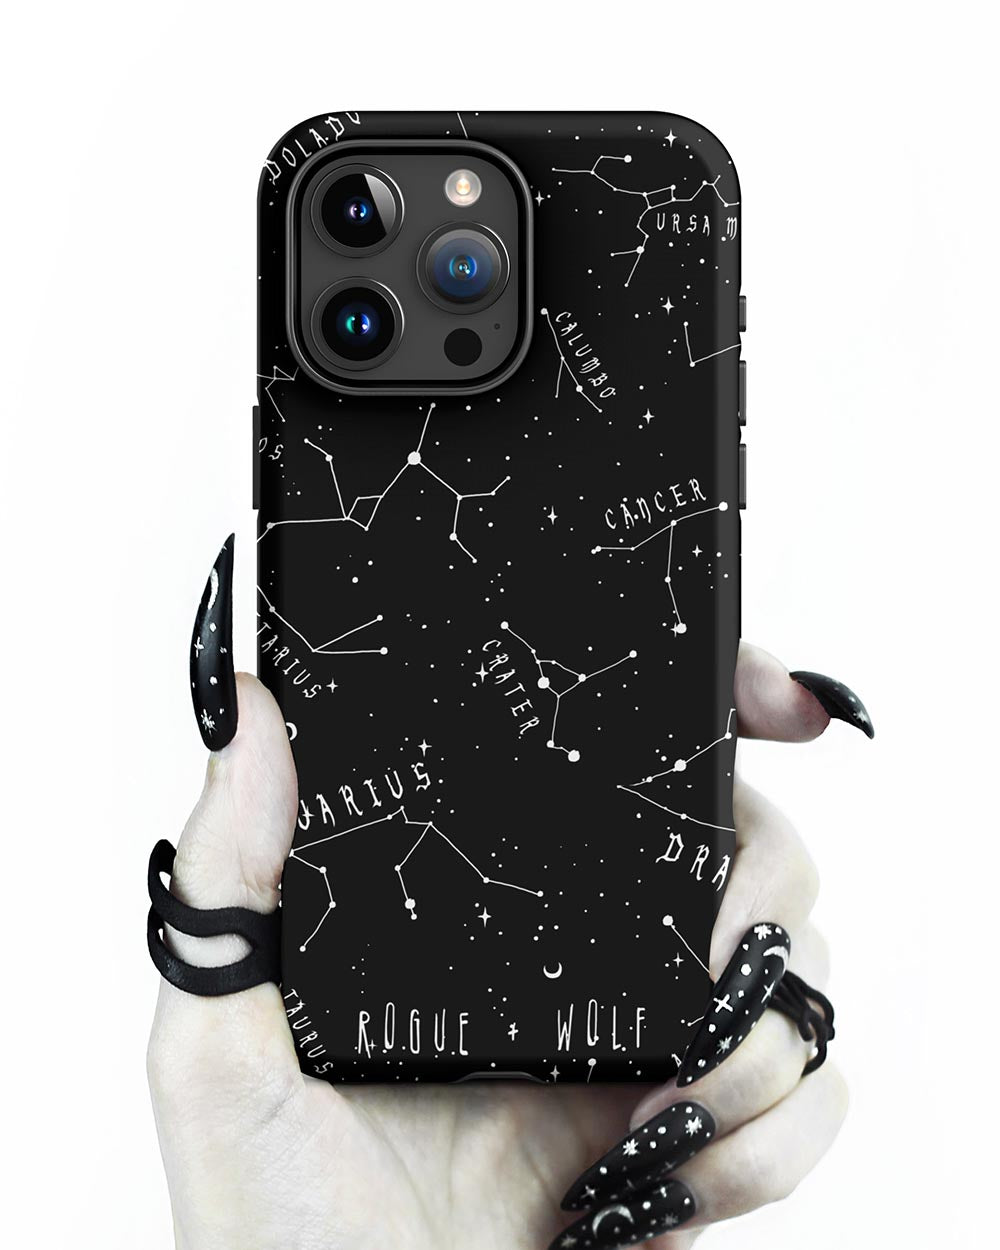 Stellar Tough Phone Case for iPhone - Constellations Magical Witchy Goth Cell Phone Cover Anti-Scratch Cool Gothic Gift